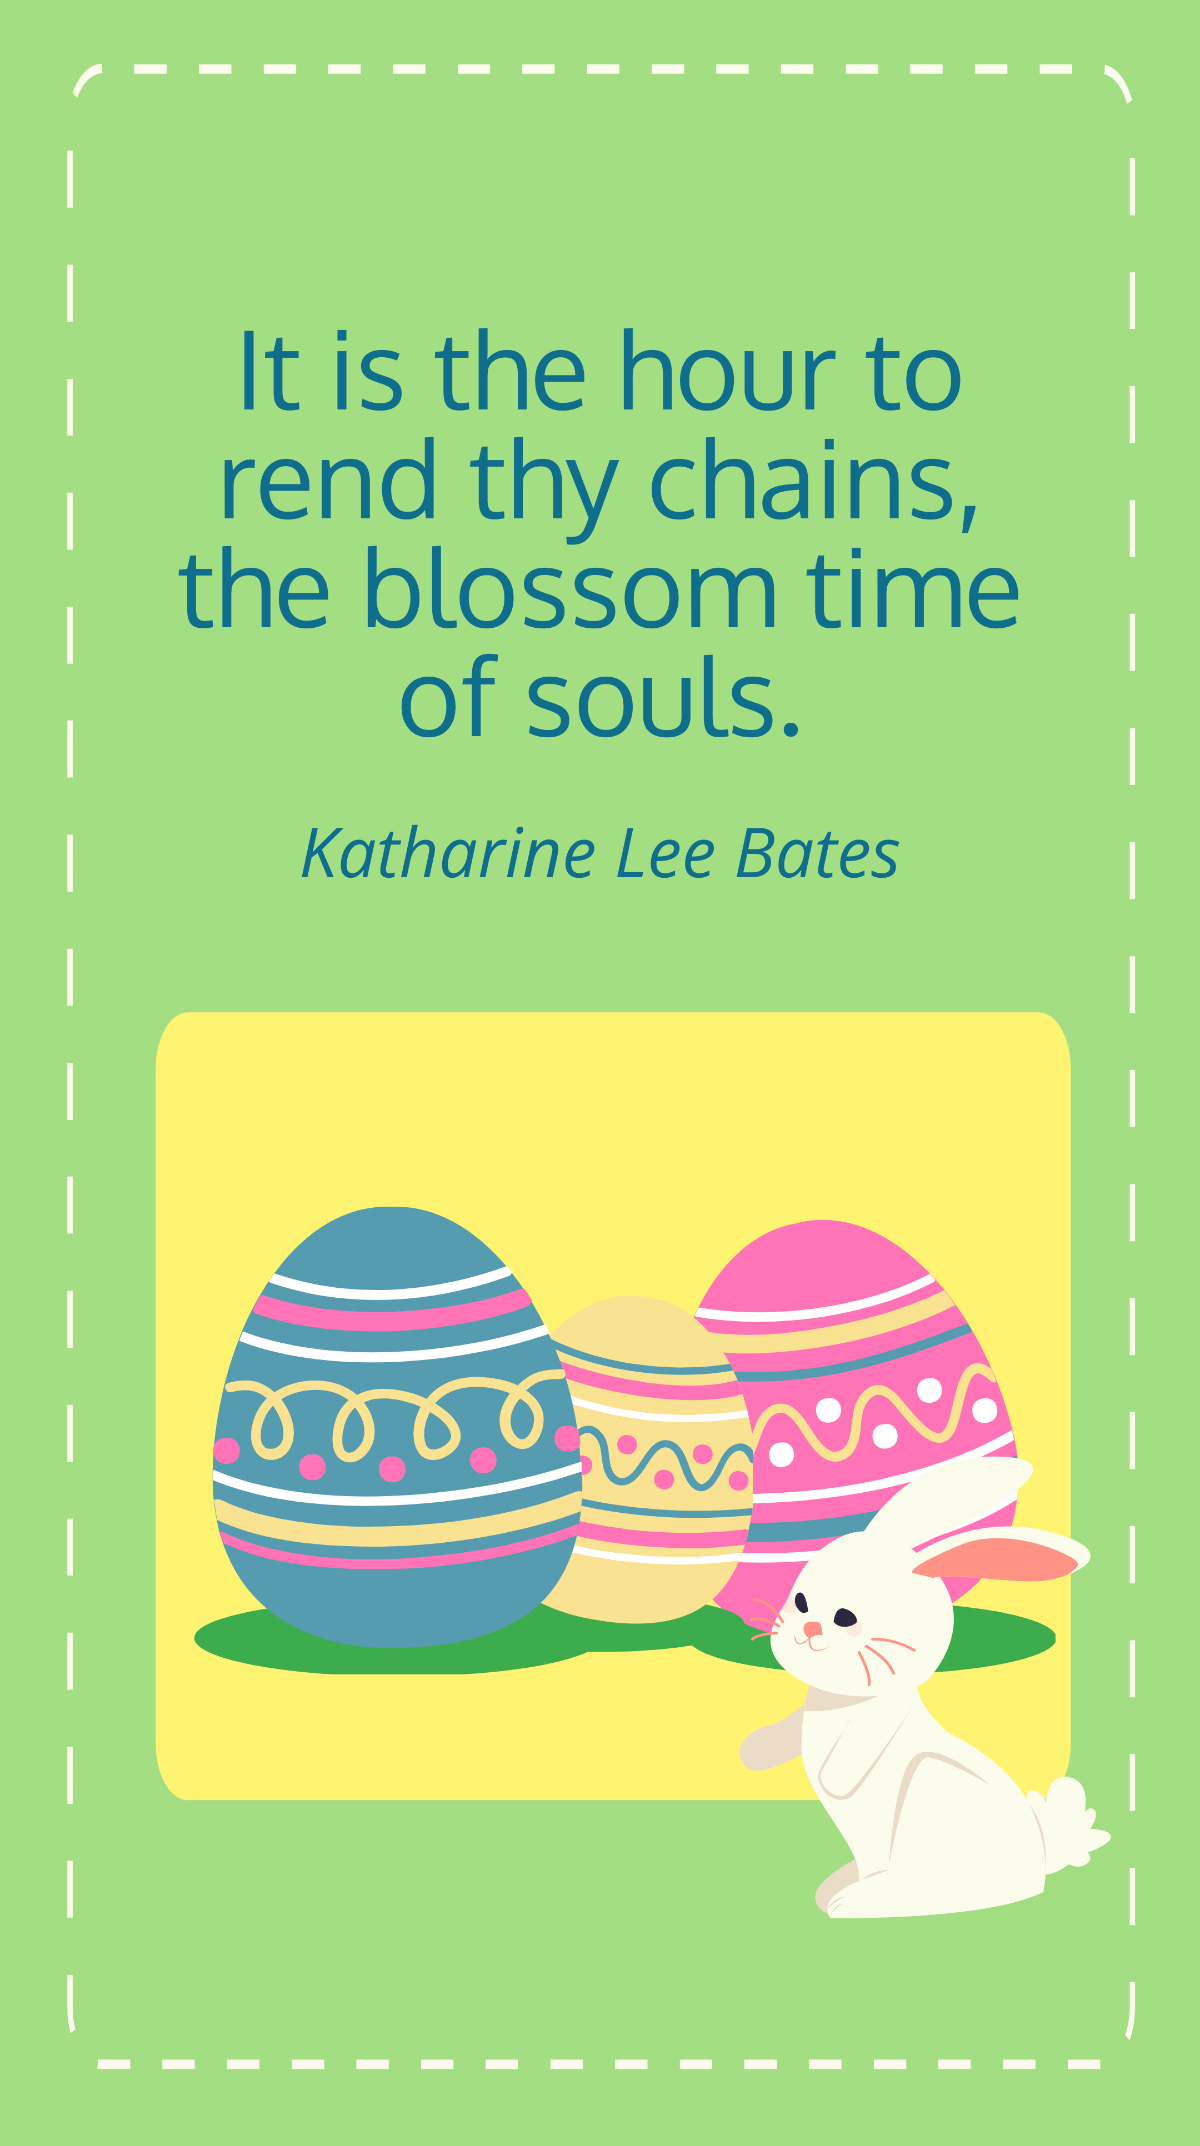 Katharine Lee Bates - It is the hour to rend thy chains, the blossom time of souls. Template